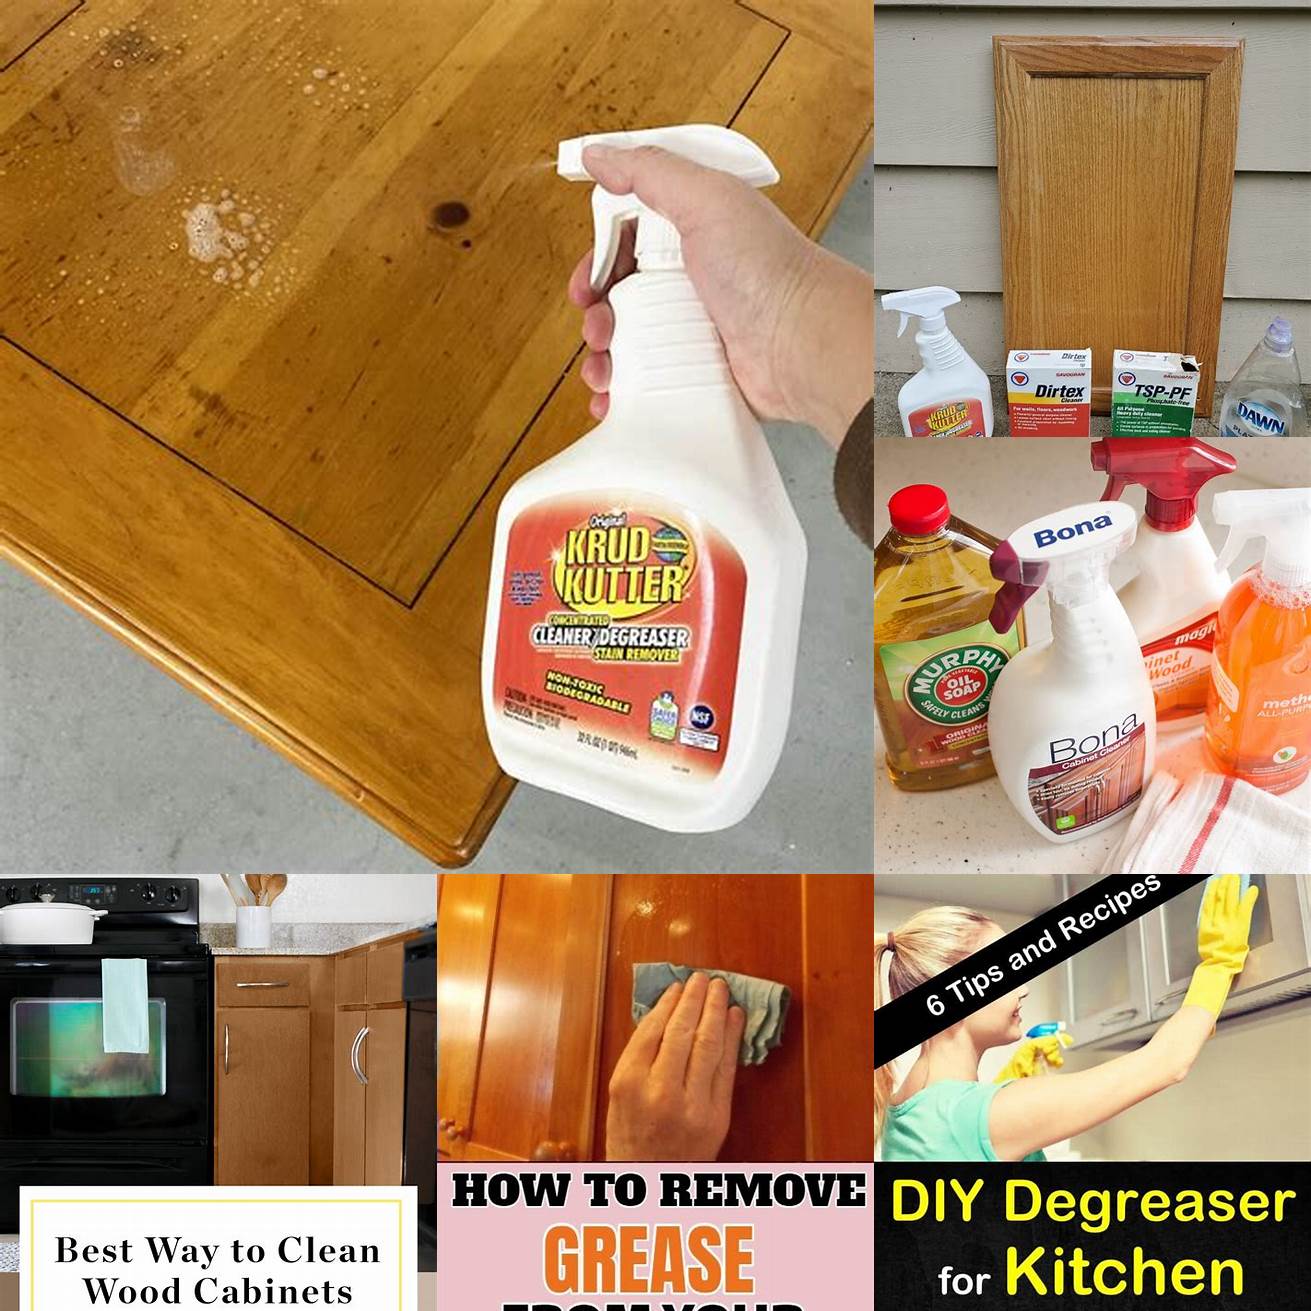 Apply a degreasing solution